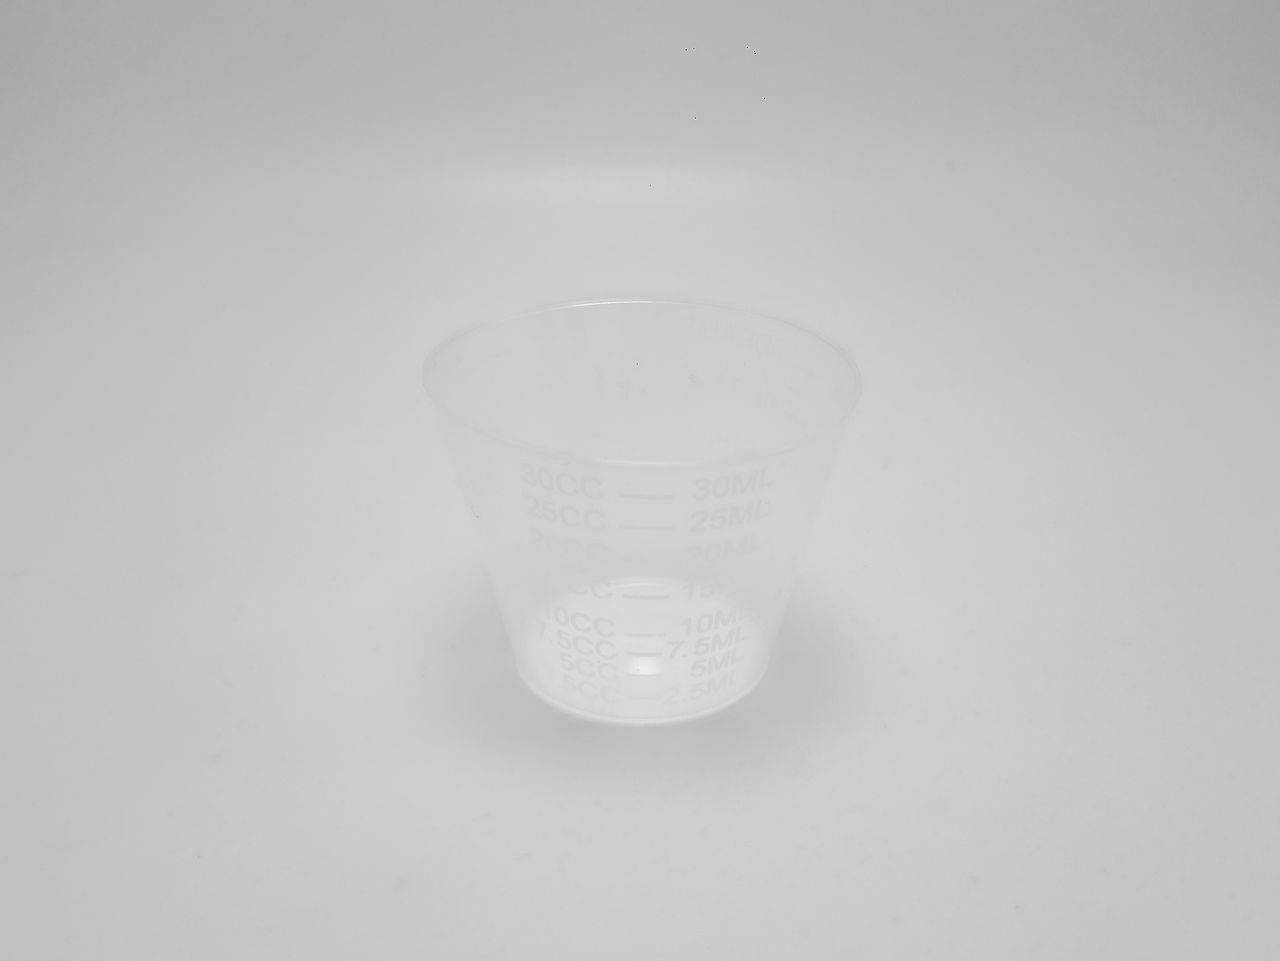 CLOSE-UP OF EMPTY GLASS OVER WHITE BACKGROUND